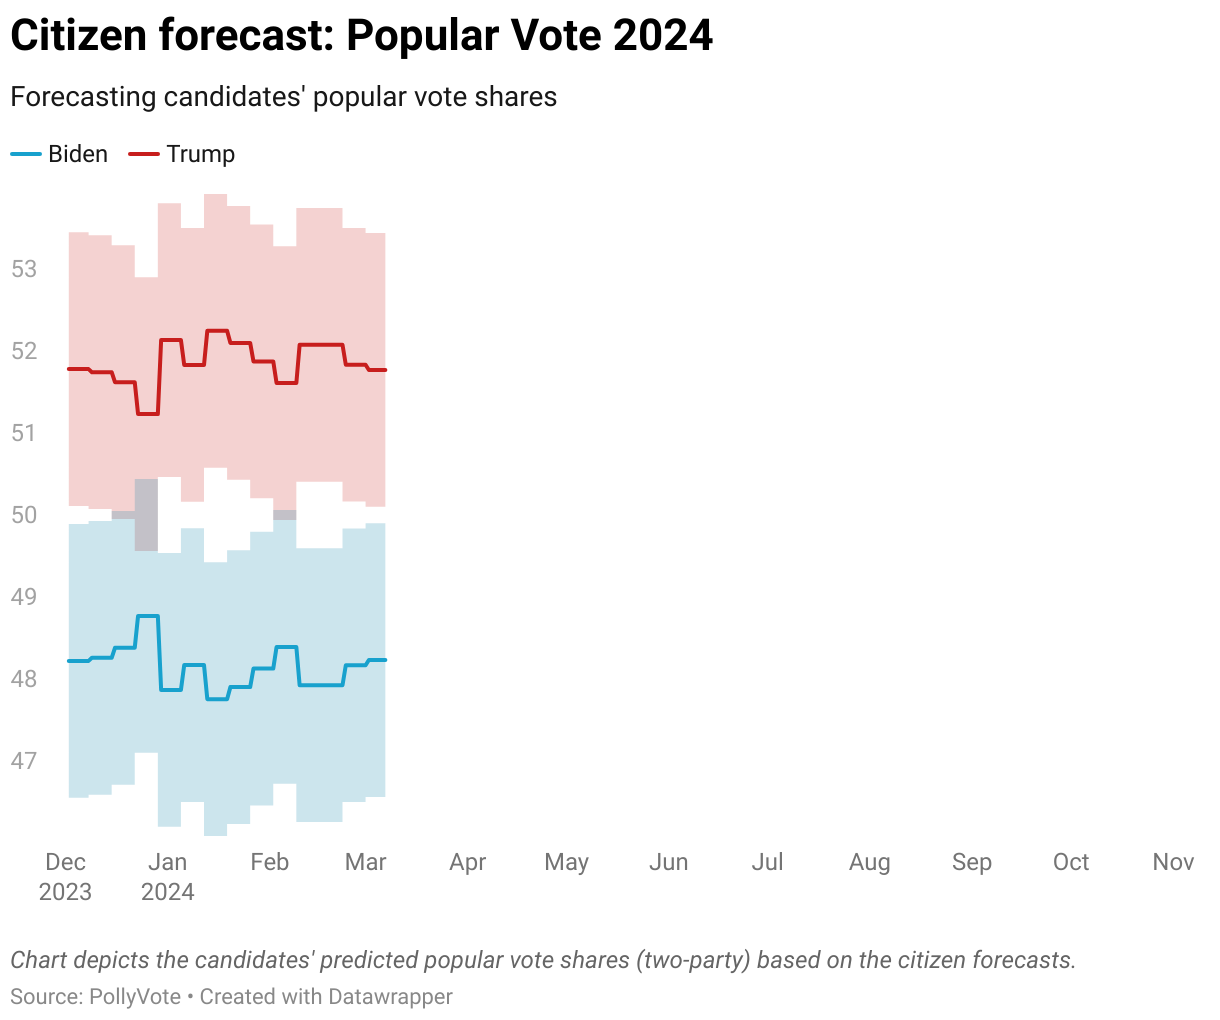 Chart depicts the candidates' predicted popular vote shares (two-party) based on the citizen forecasts.